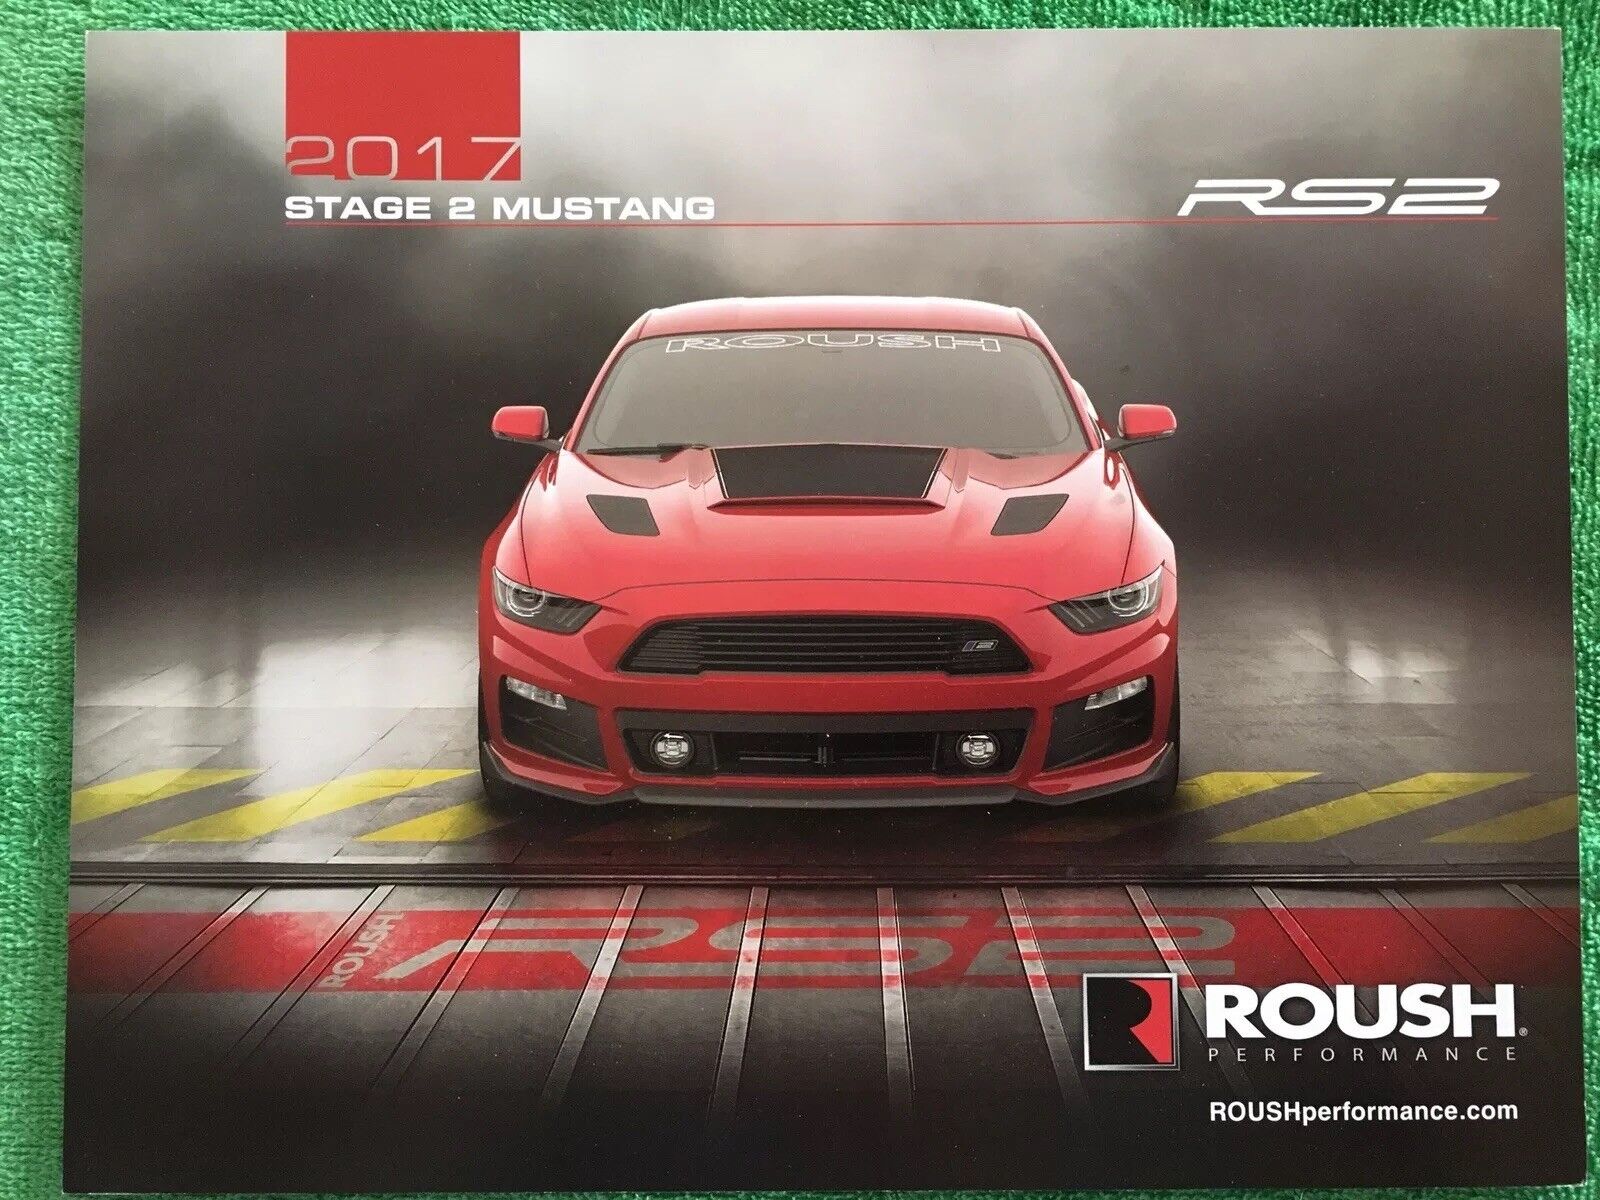 2017 Roush Stage 2 Mustang Spec Card